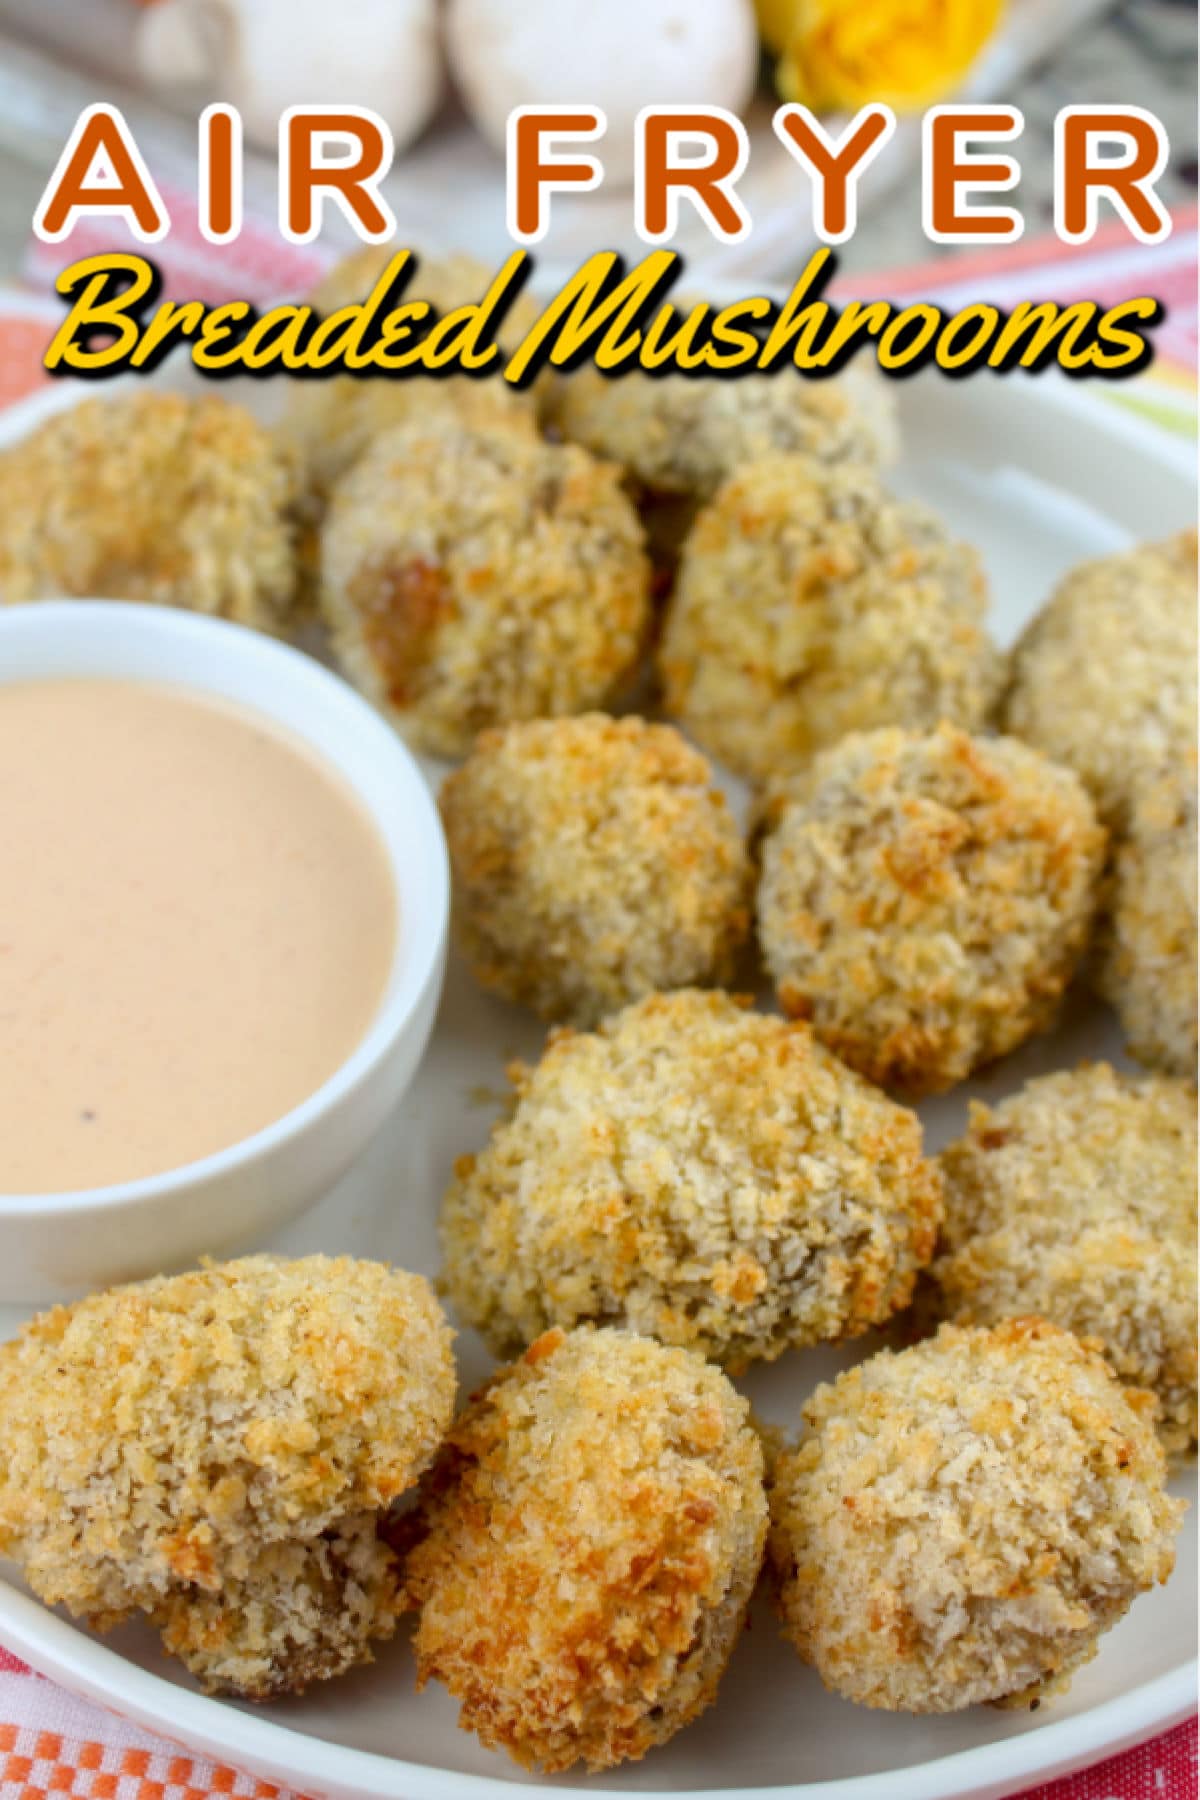 Breaded mushrooms are one of my favorite restaurant appetizers that I've never made at home - until now!!!! With the air fryer - there's no mess of oil - and they're crispy and just as delicious. These air fryer breaded mushrooms will hit the SPOT for you any night!  via @foodhussy